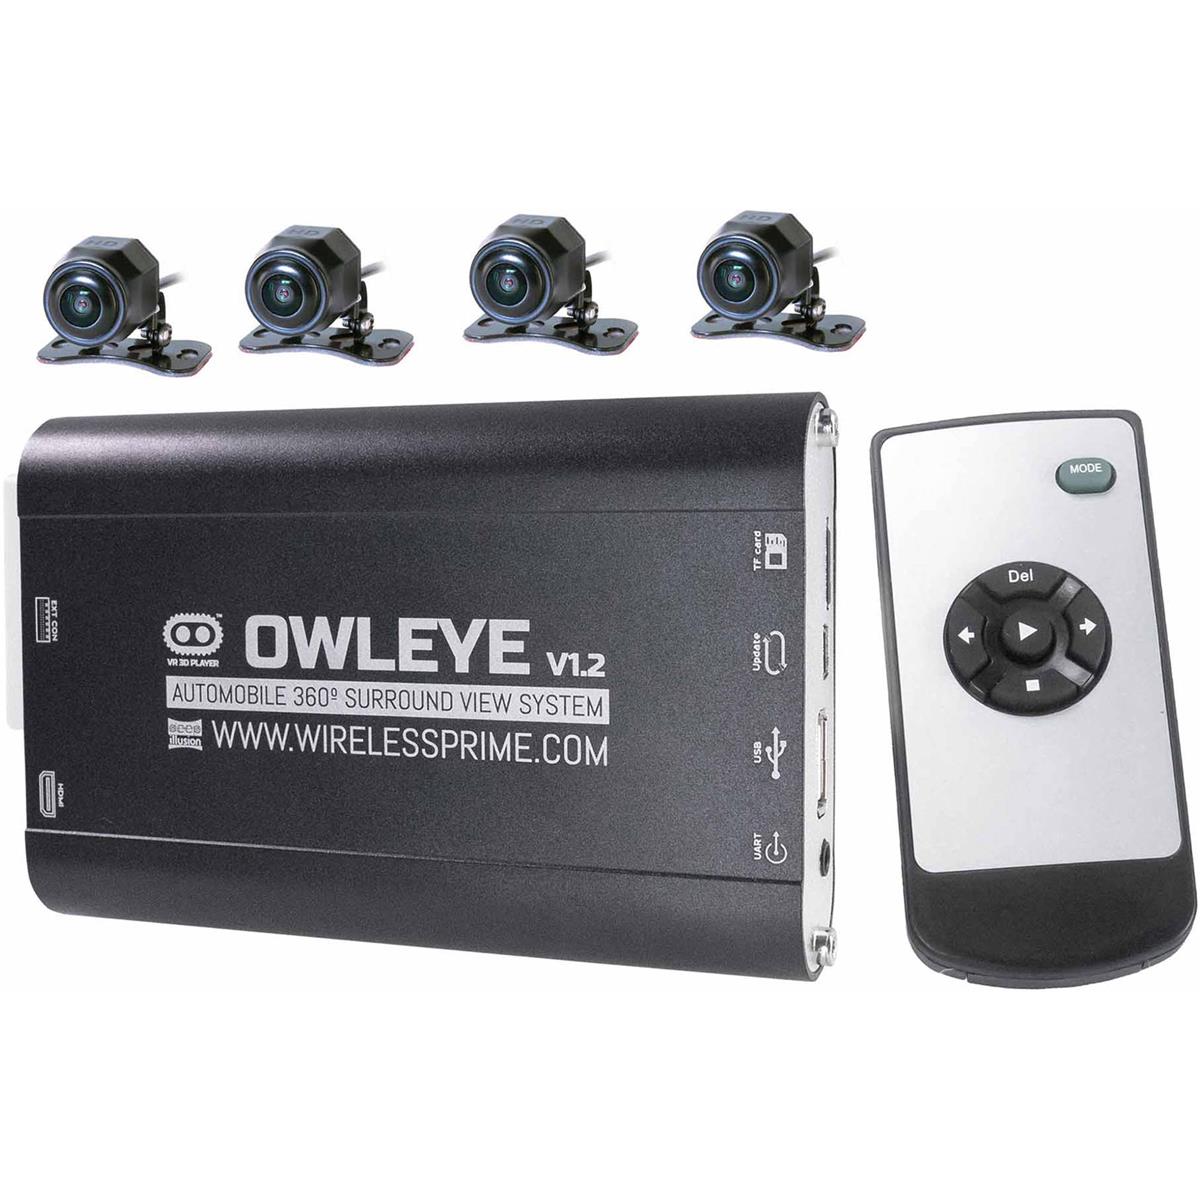 Image of Cinegears Owleye Automobile VR 360 DVR Surround View System for Consumer V1.2